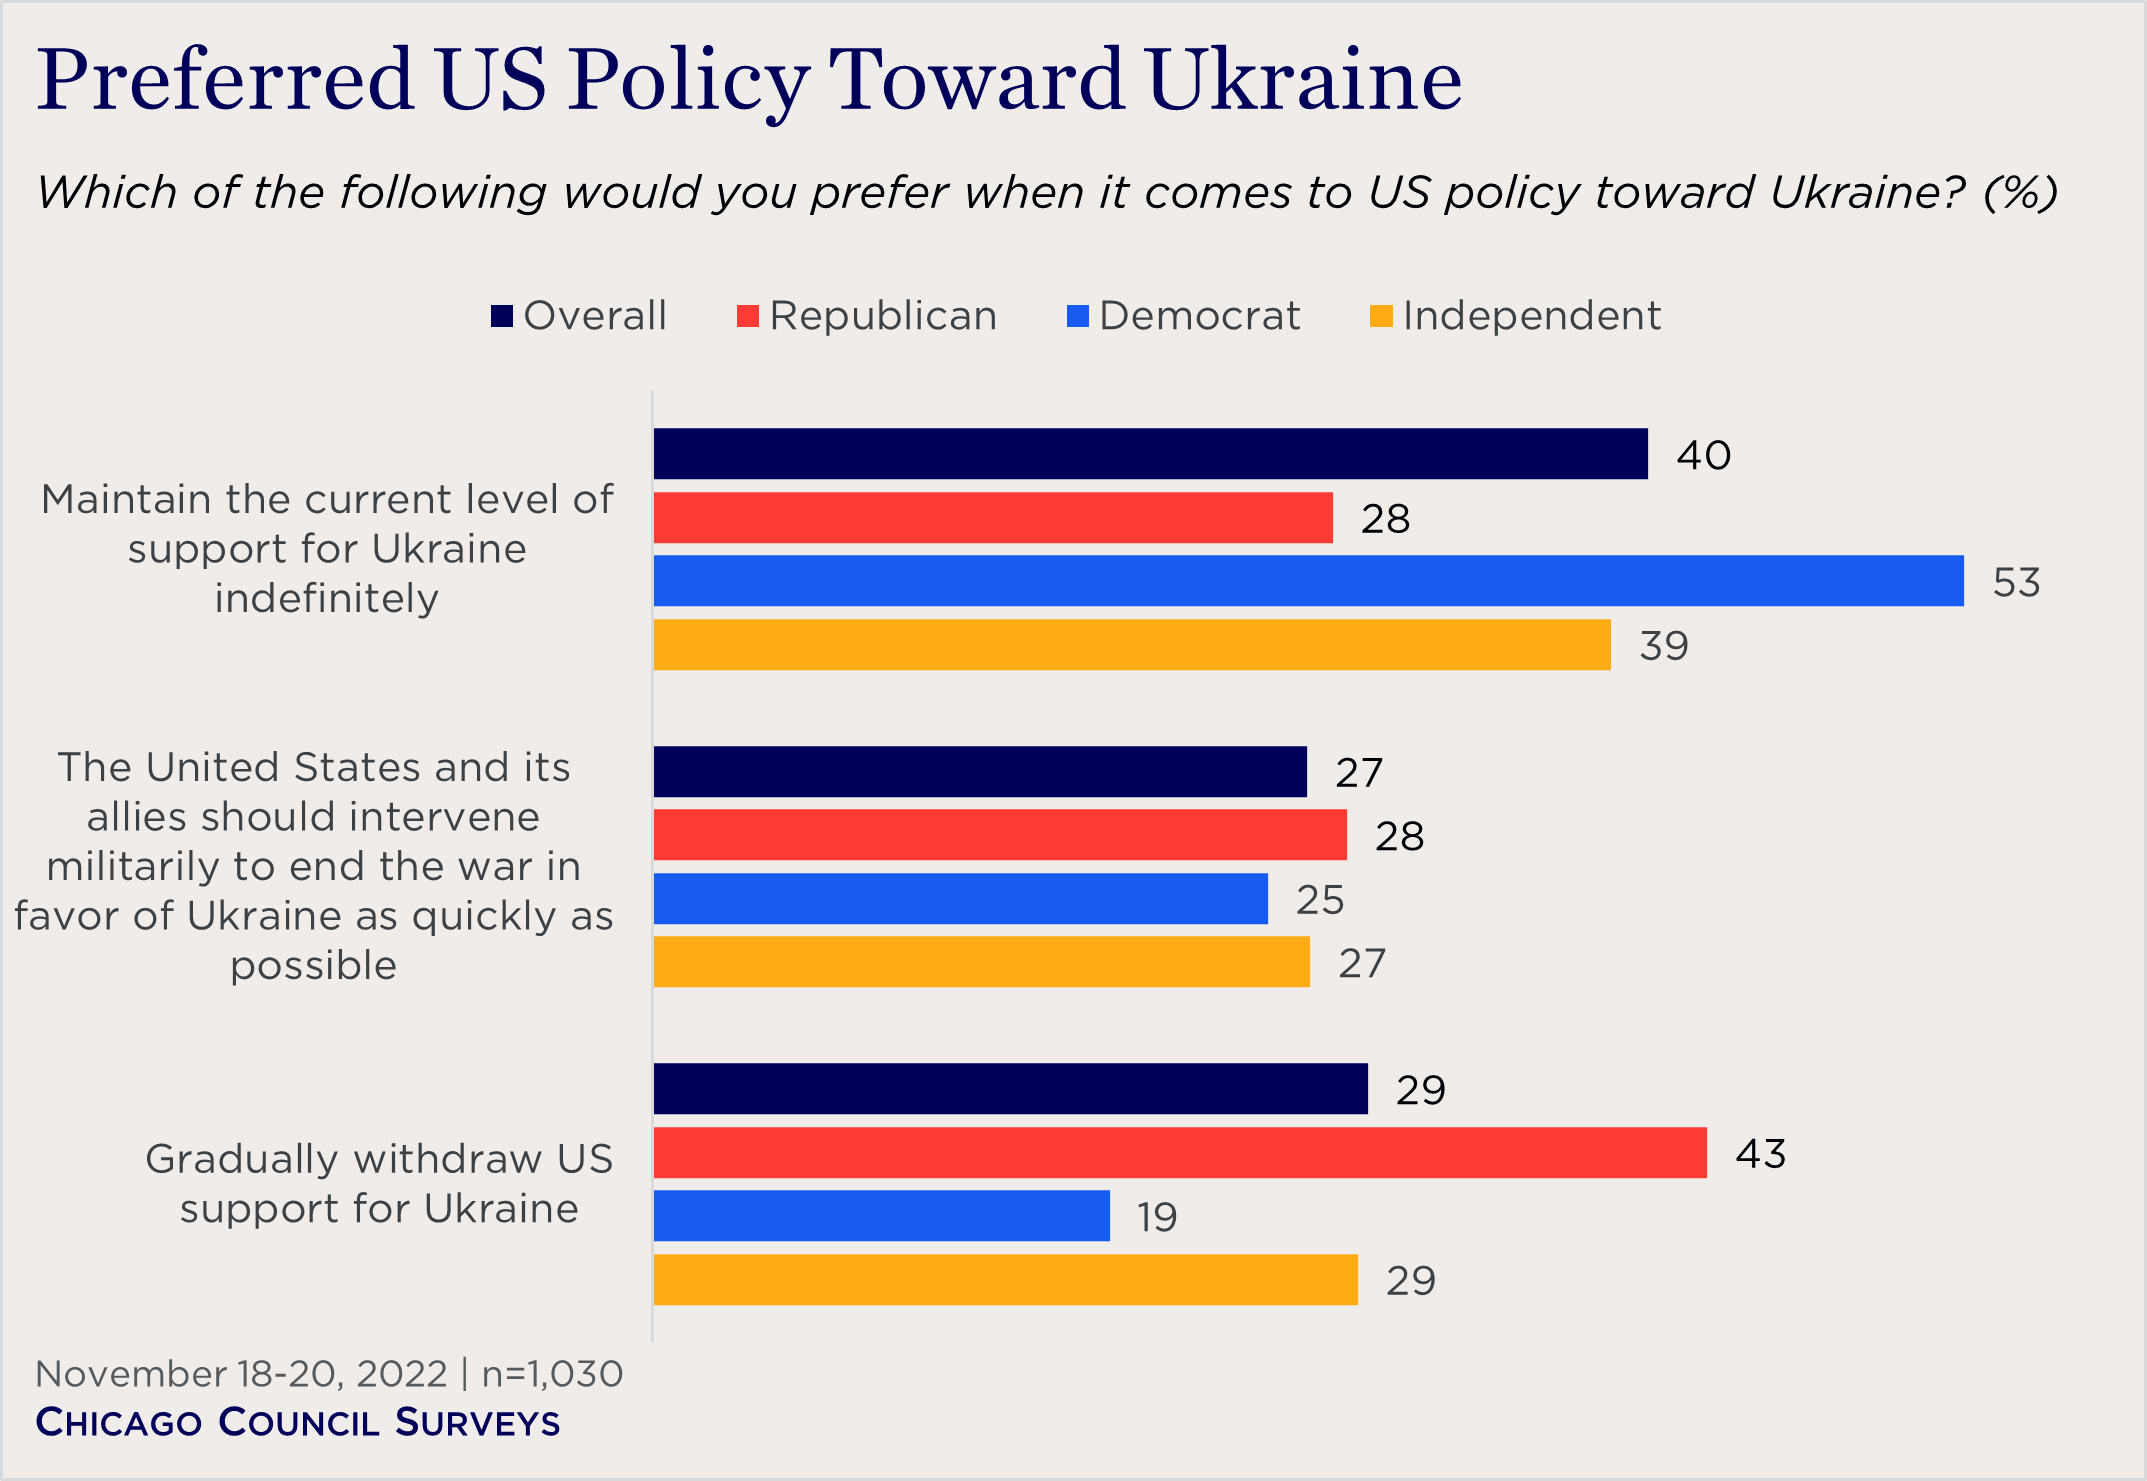 "bar chart showing partisan preferences on US policy toward Ukraine"